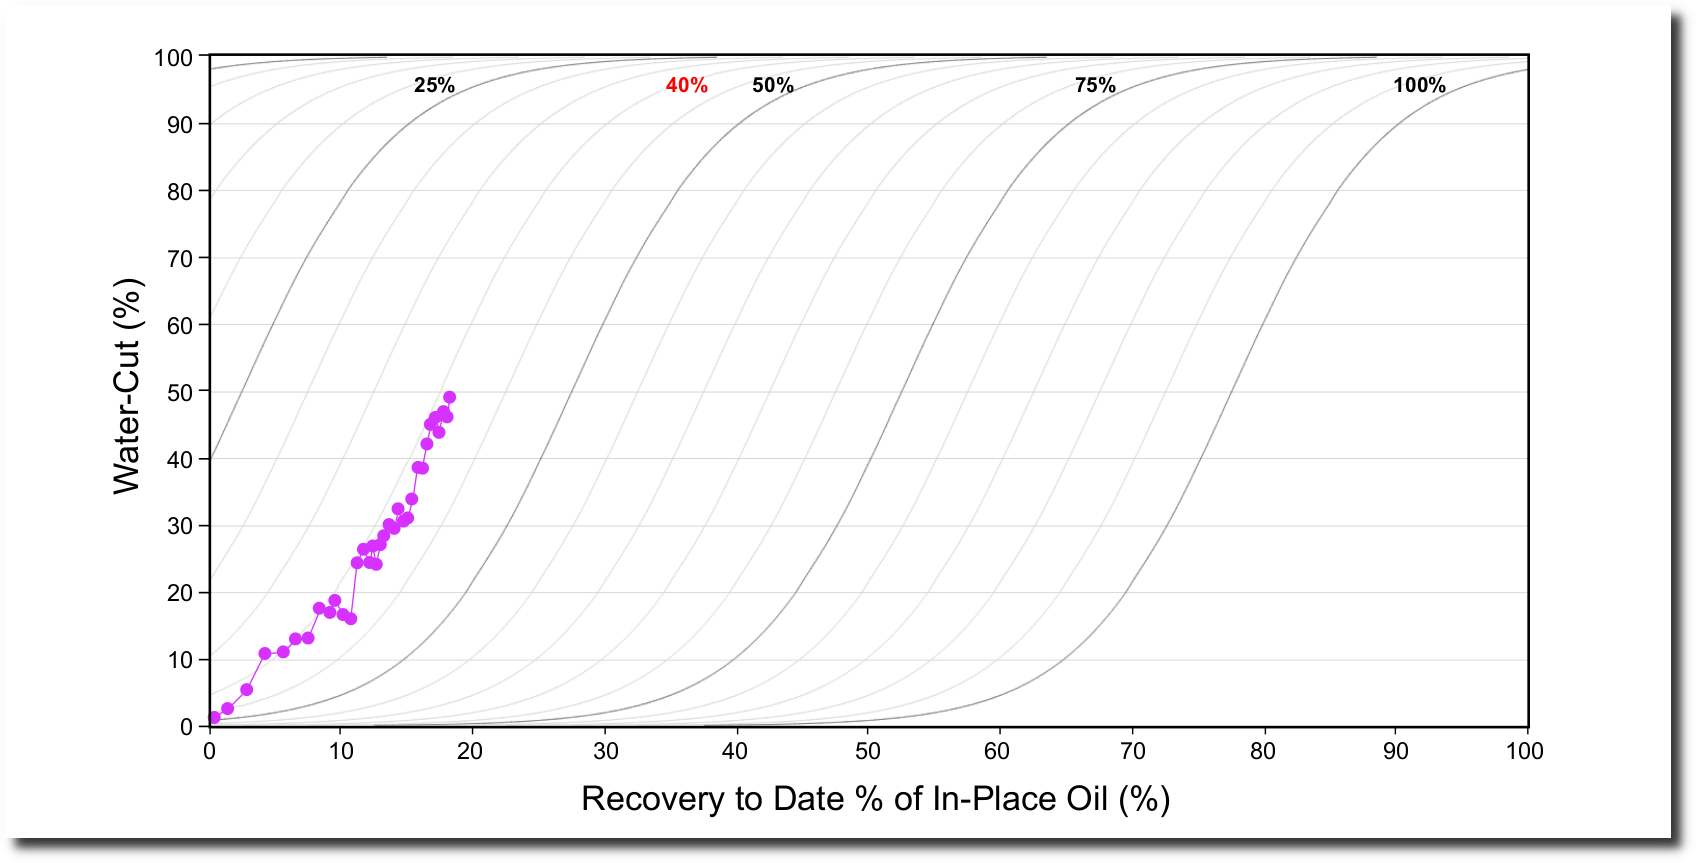 Figure 3 Shadow- Amal Field Recovery efficiency against Empirical Recovery Chart (Tong, 1988)